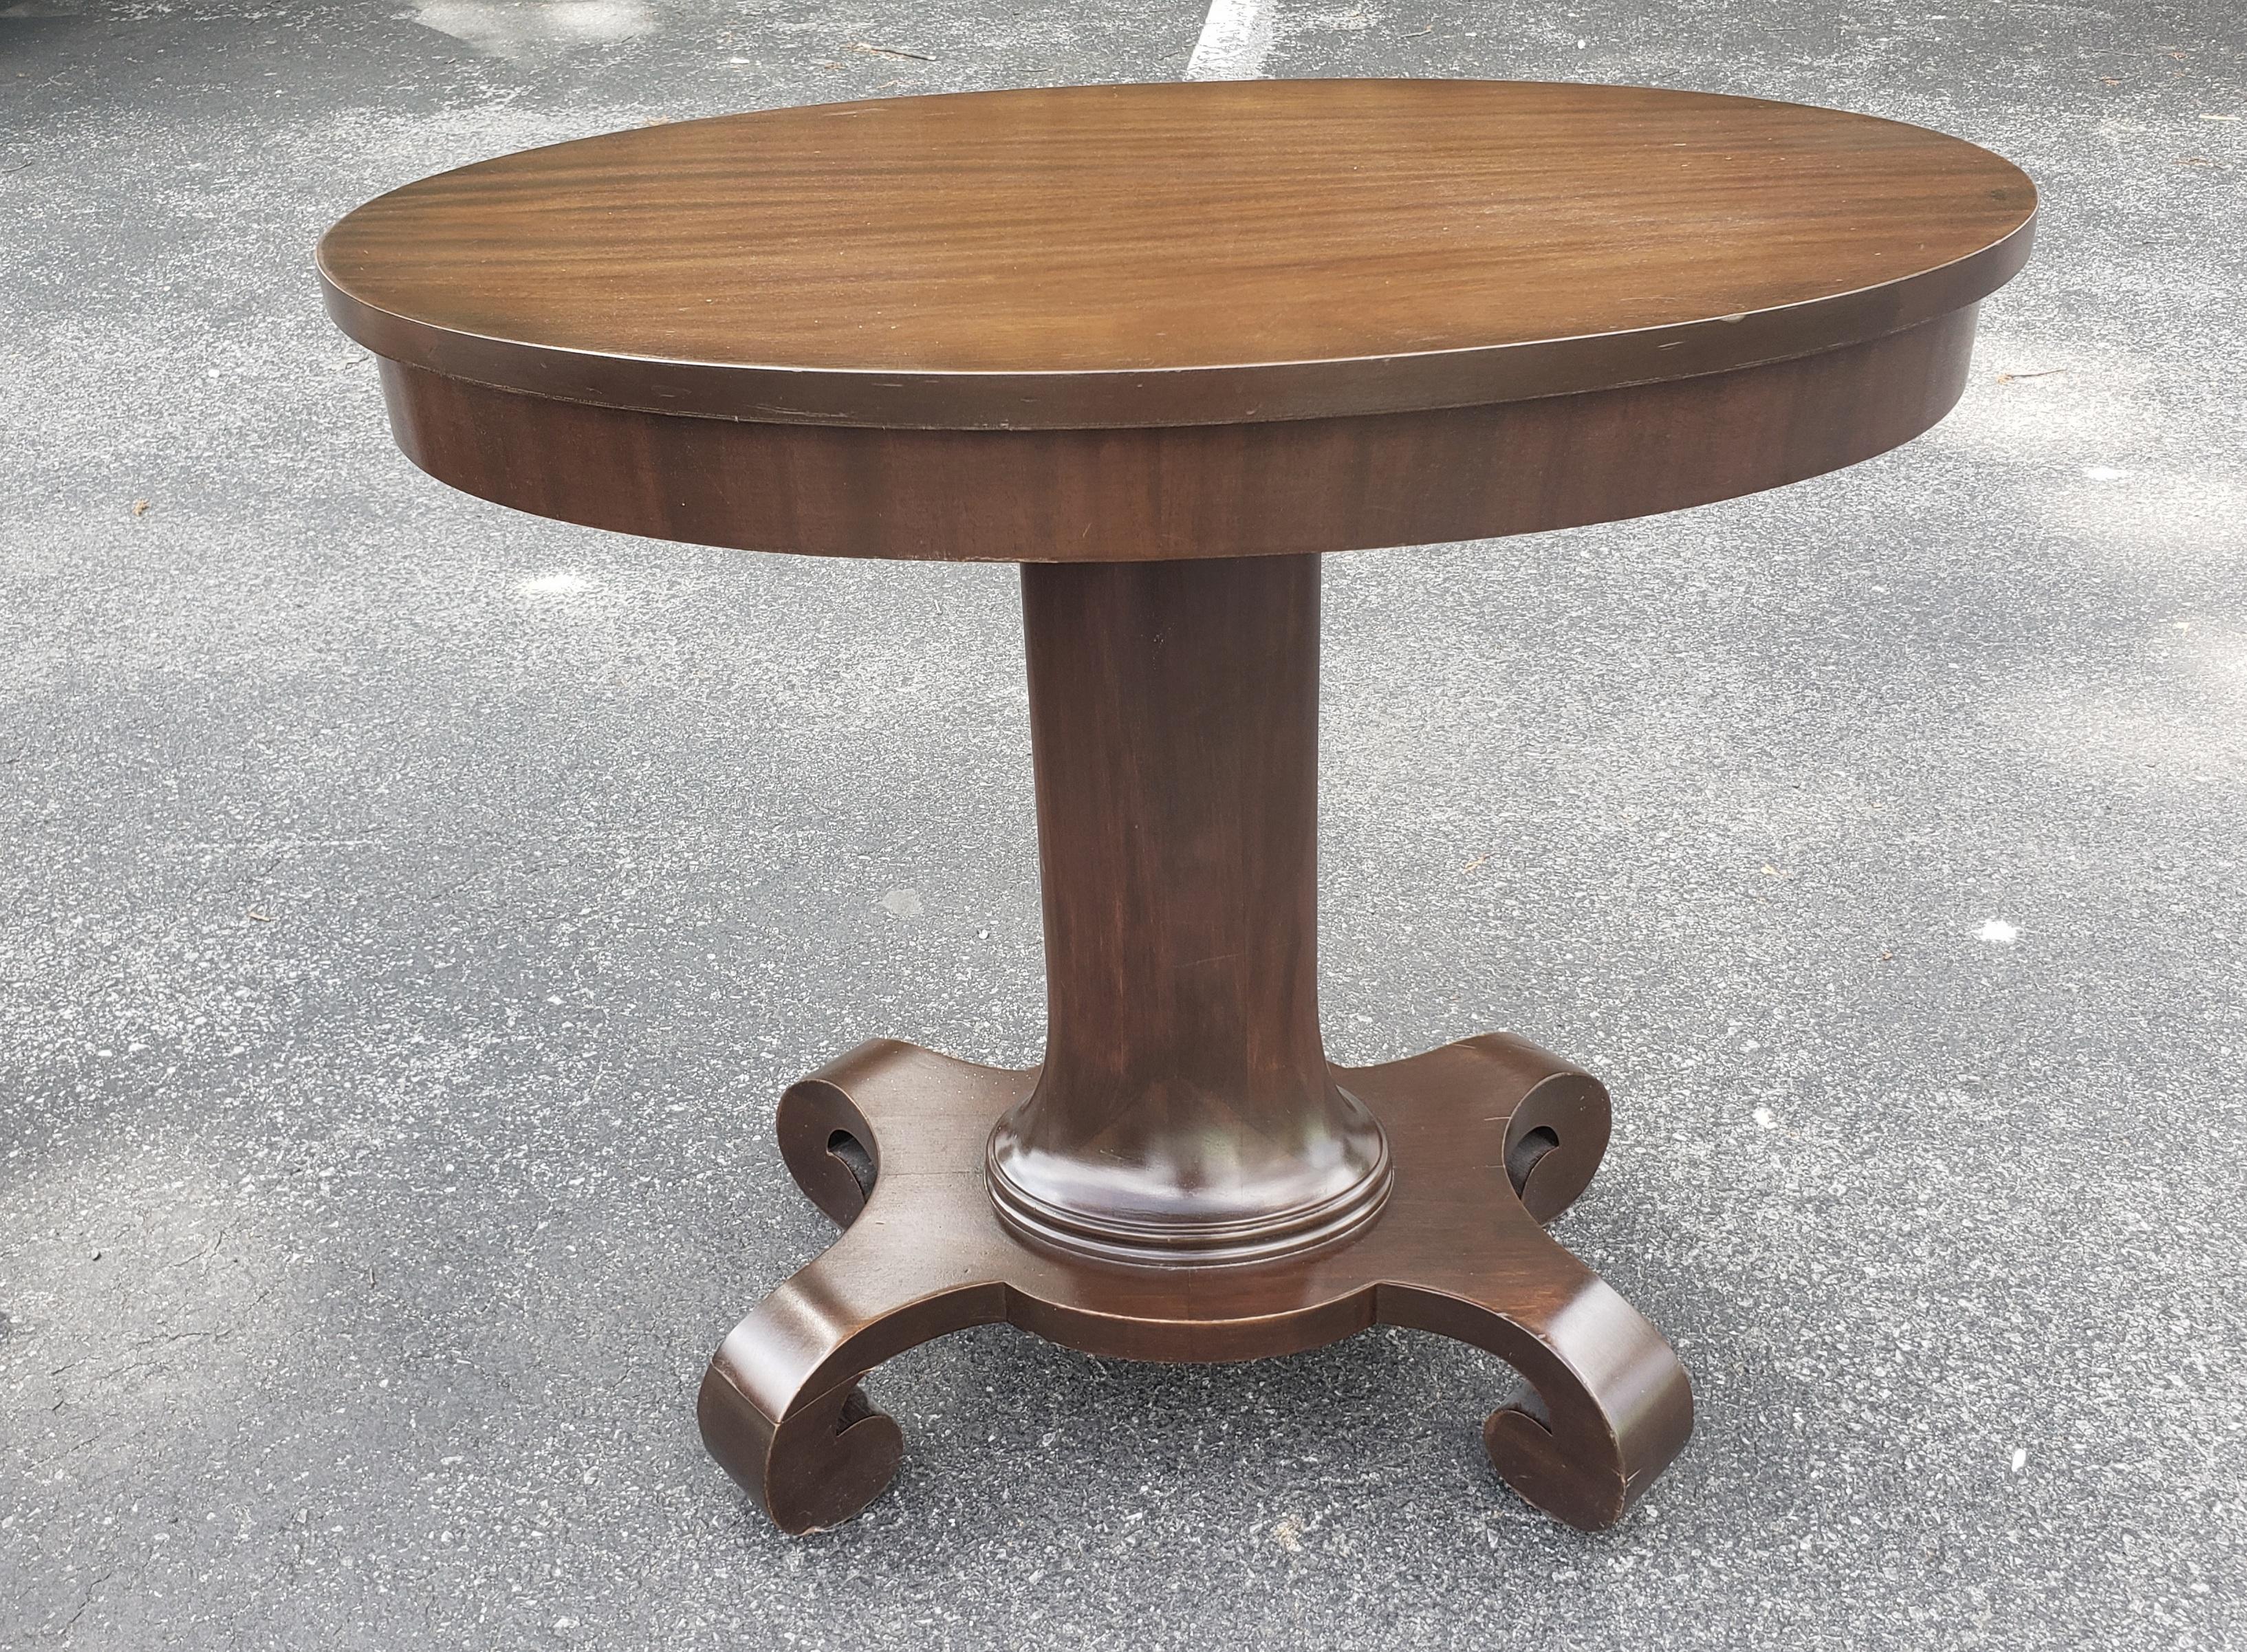 A newly and fully refinished solid mahogany American Empire Oval Pedestal side table. Features four large scroll feet under the Pedestal. Hand Rub refinished. May be used as a side table, center table, as a hall table as a library table or as plant